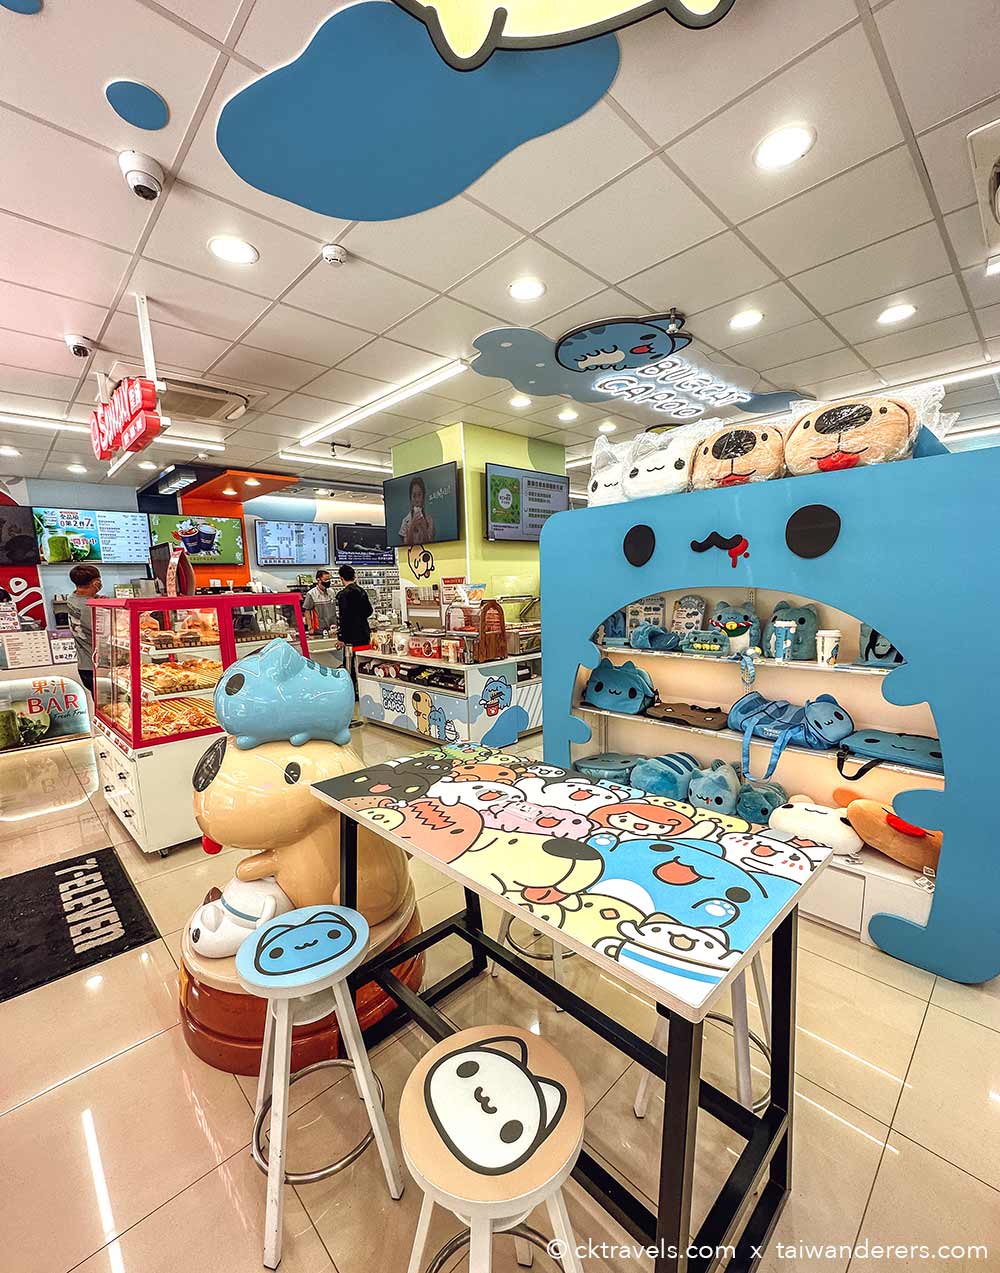 Bugcat Capoo themed 7-eleven convenience store in Taipei Taiwan